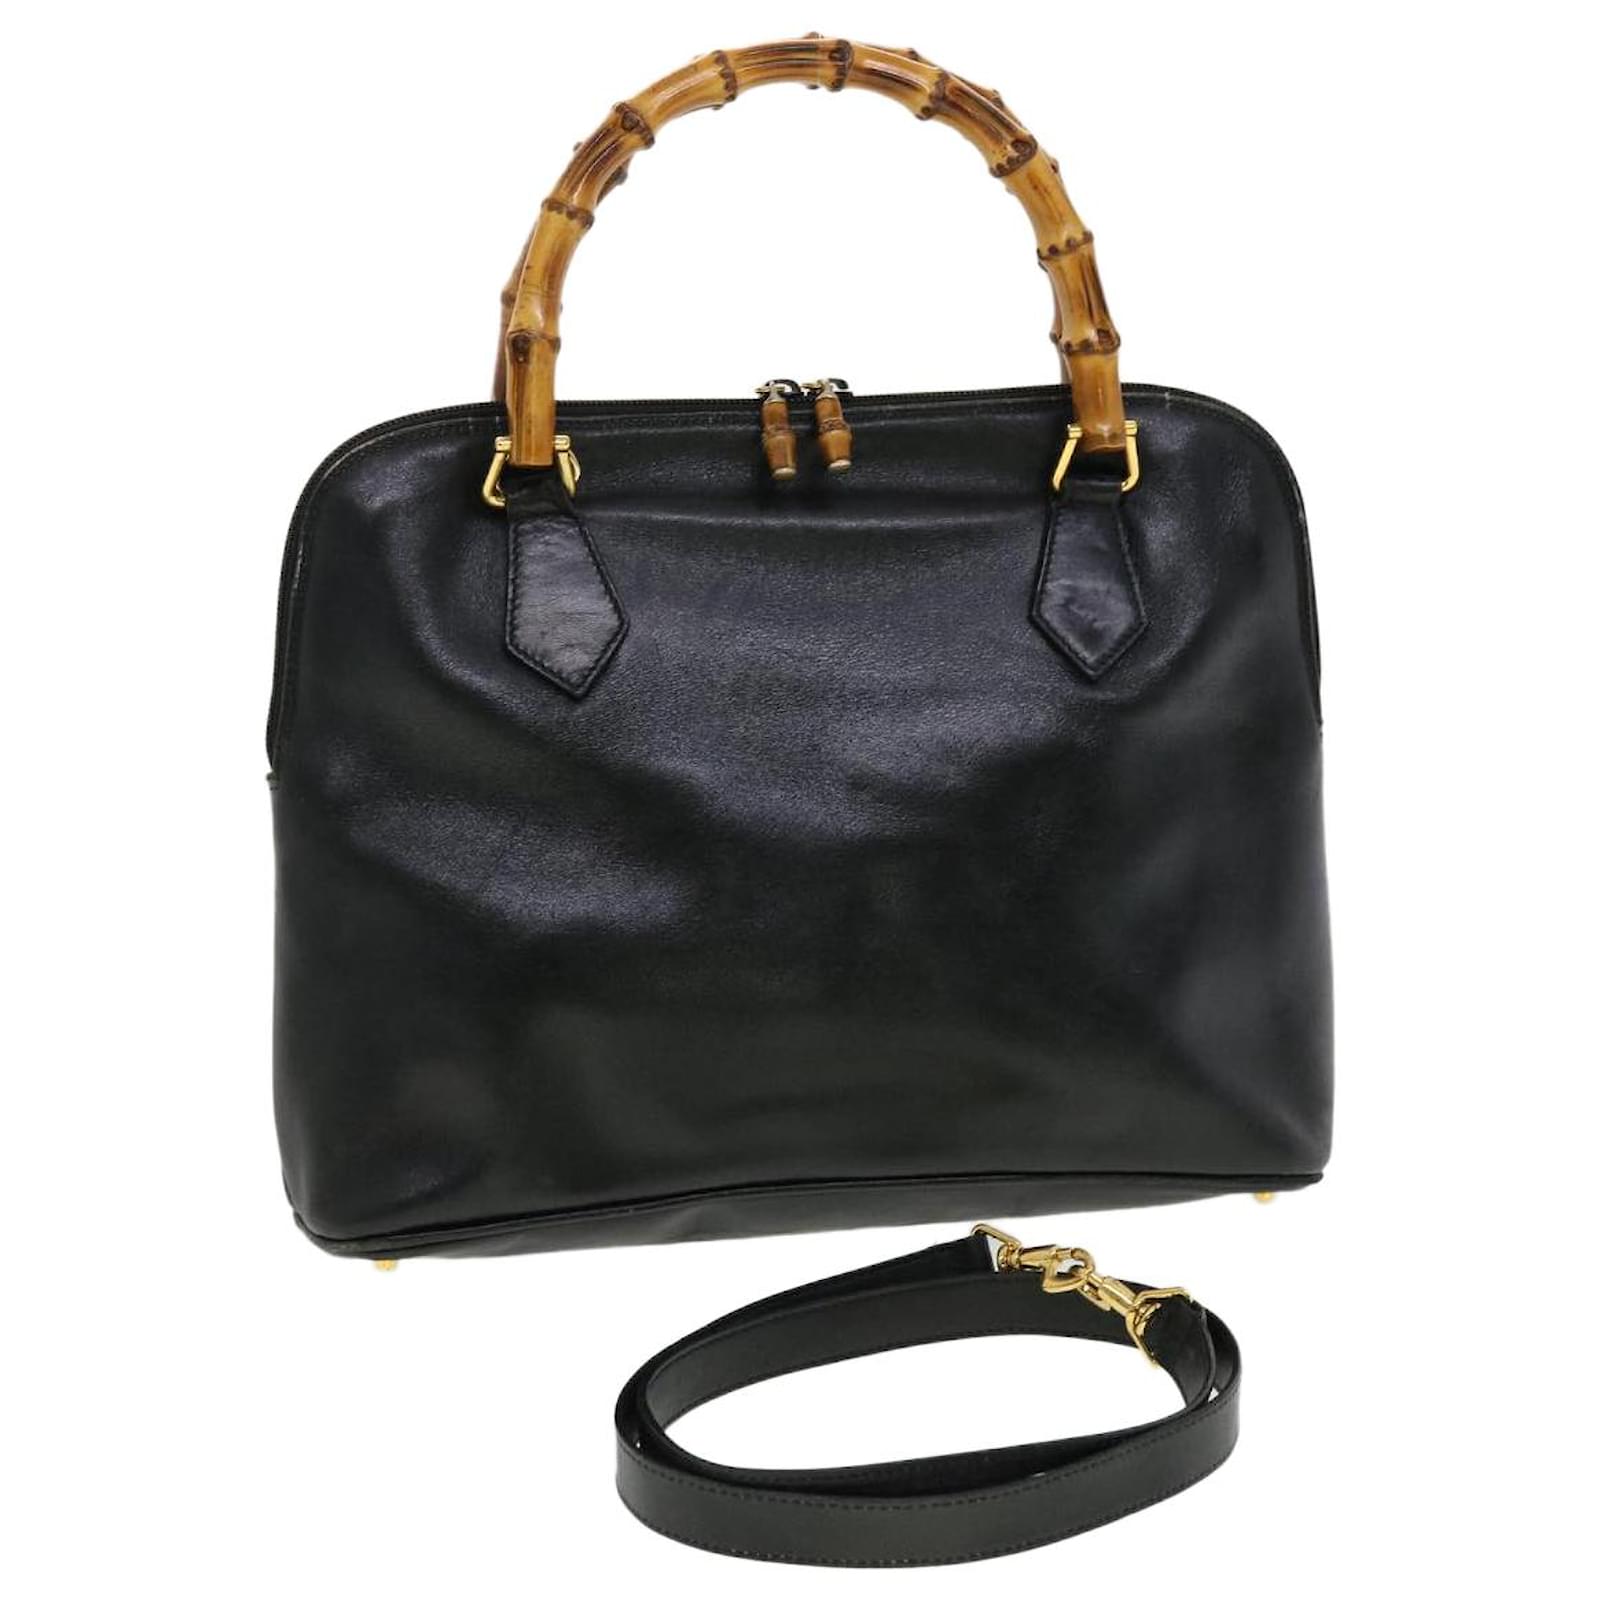 Gucci Vintage Alma Tote in Dark Brown Leather with Bamboo Handles